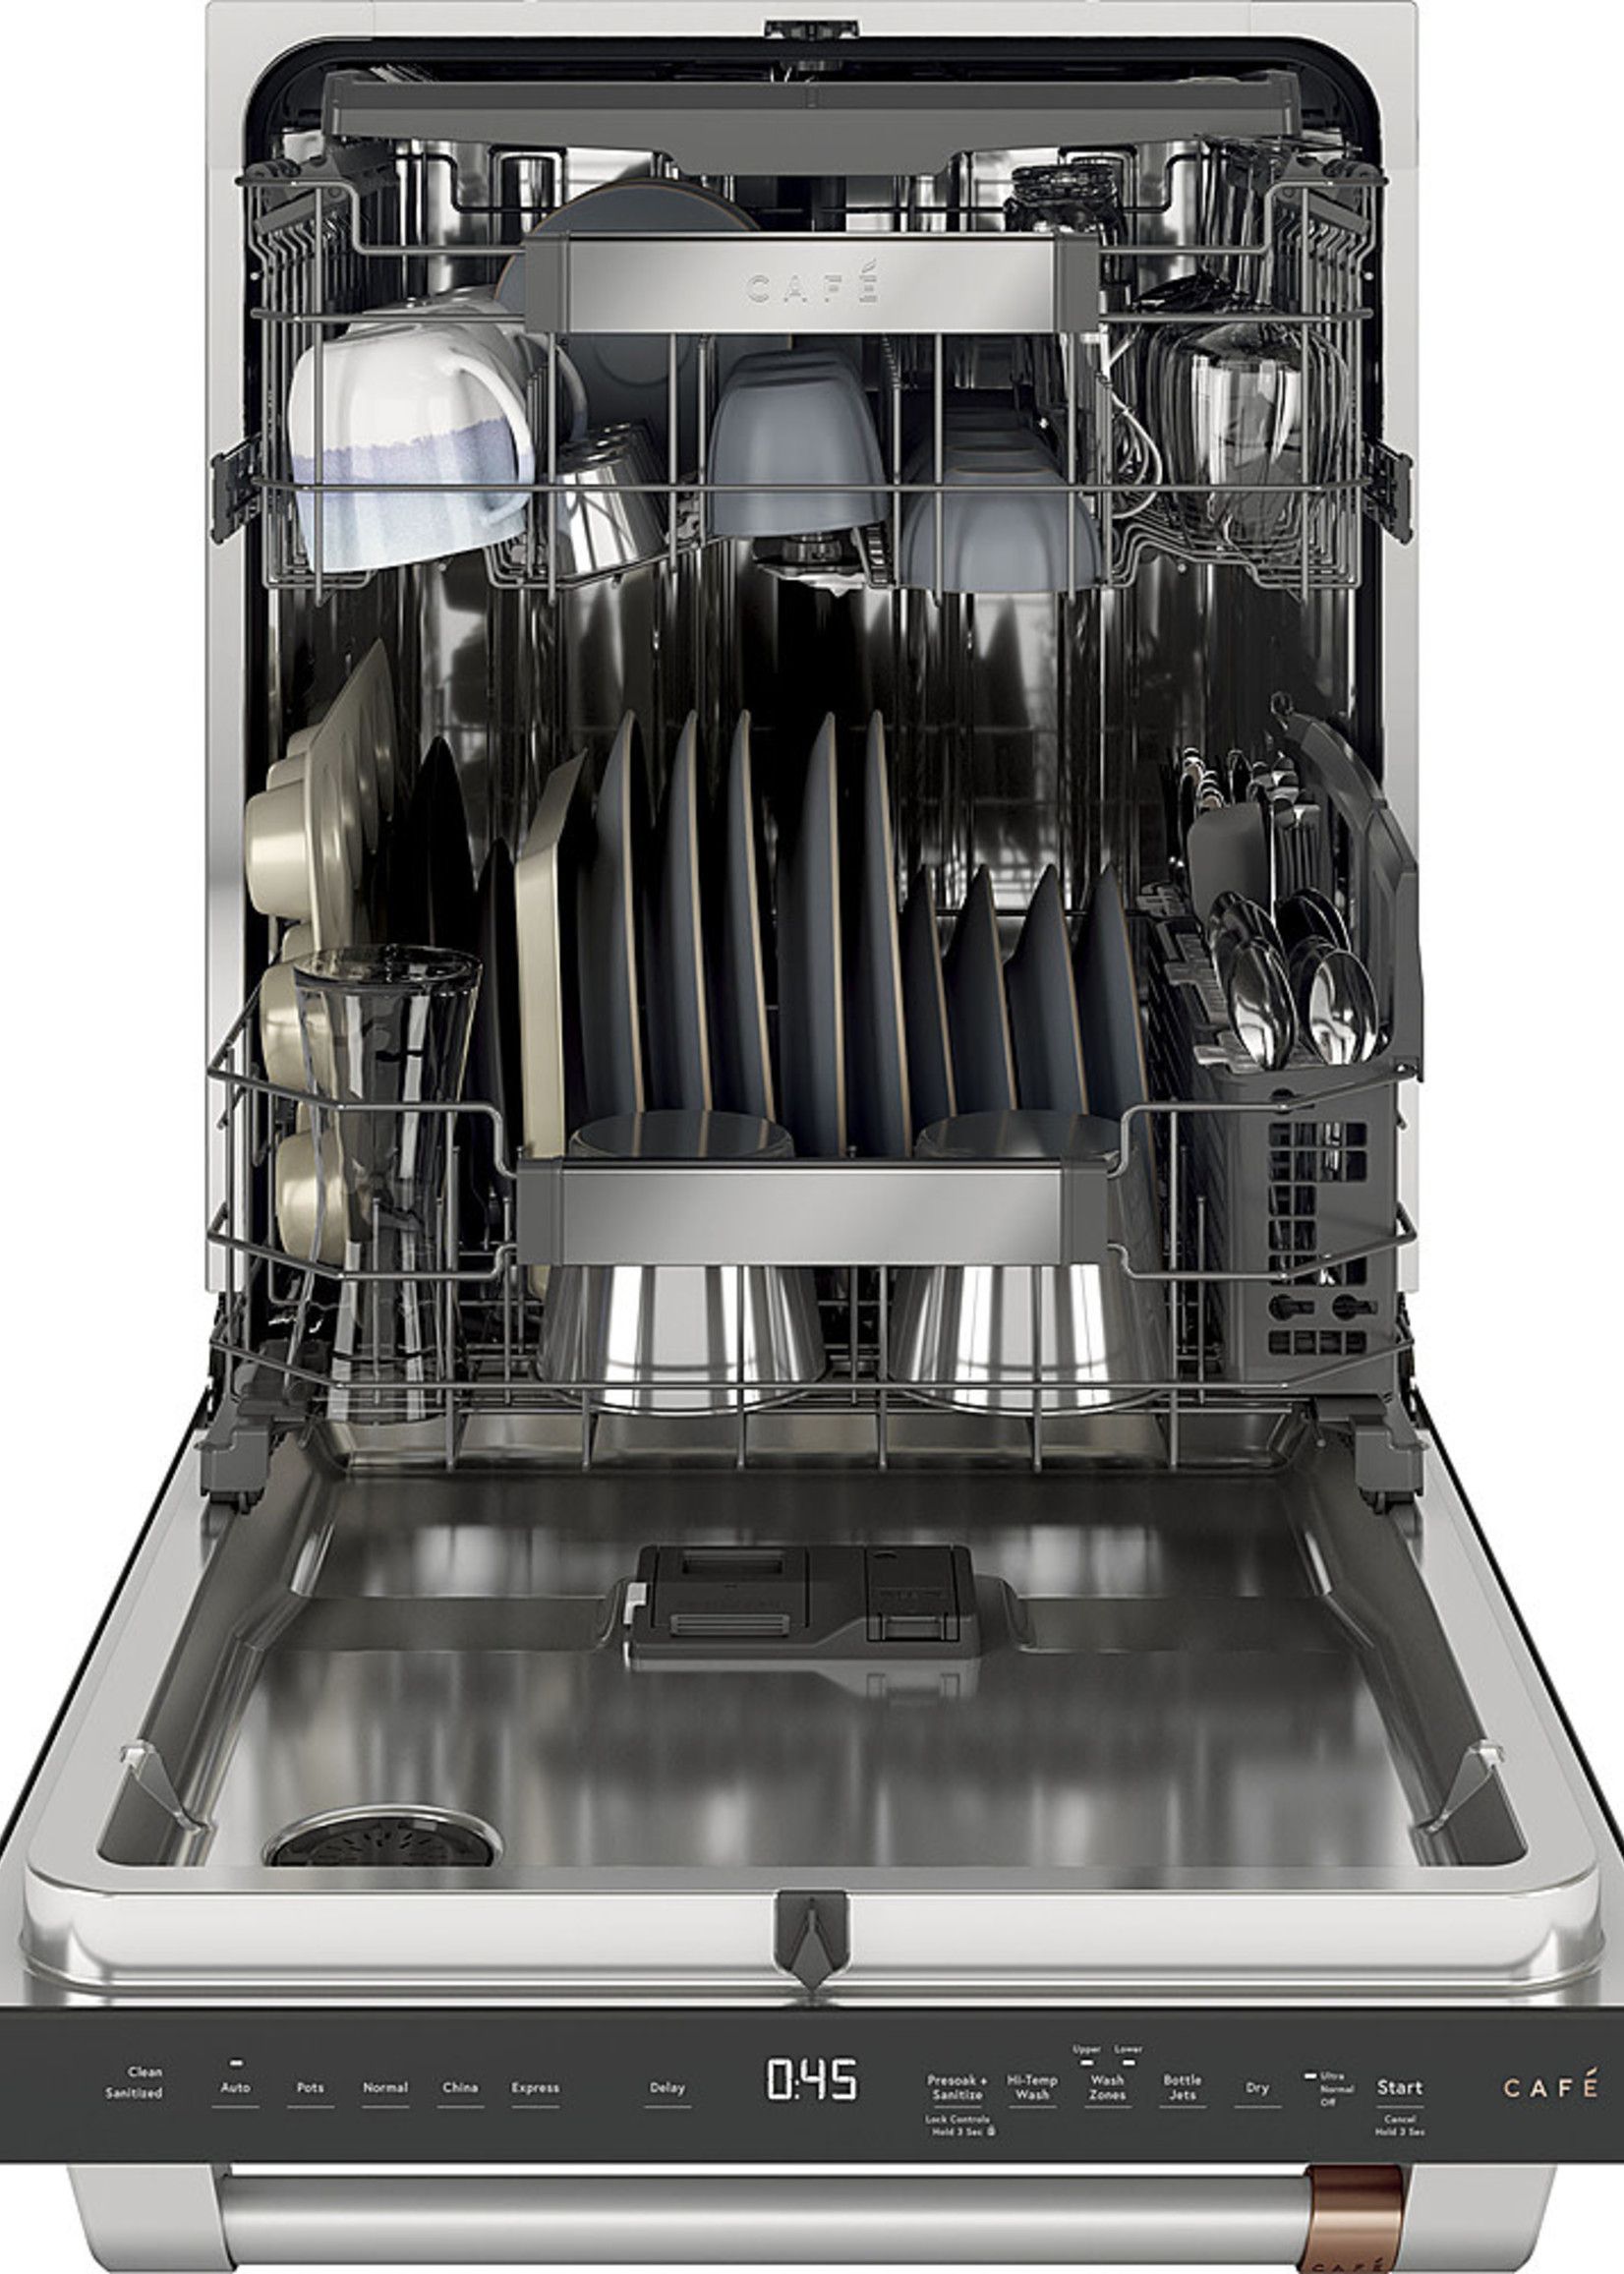 CAFE *Cafe CDT805P2N5S   24" Top Control Tall Tub Built-In Dishwasher with Stainless Steel Tub - Stainless steel